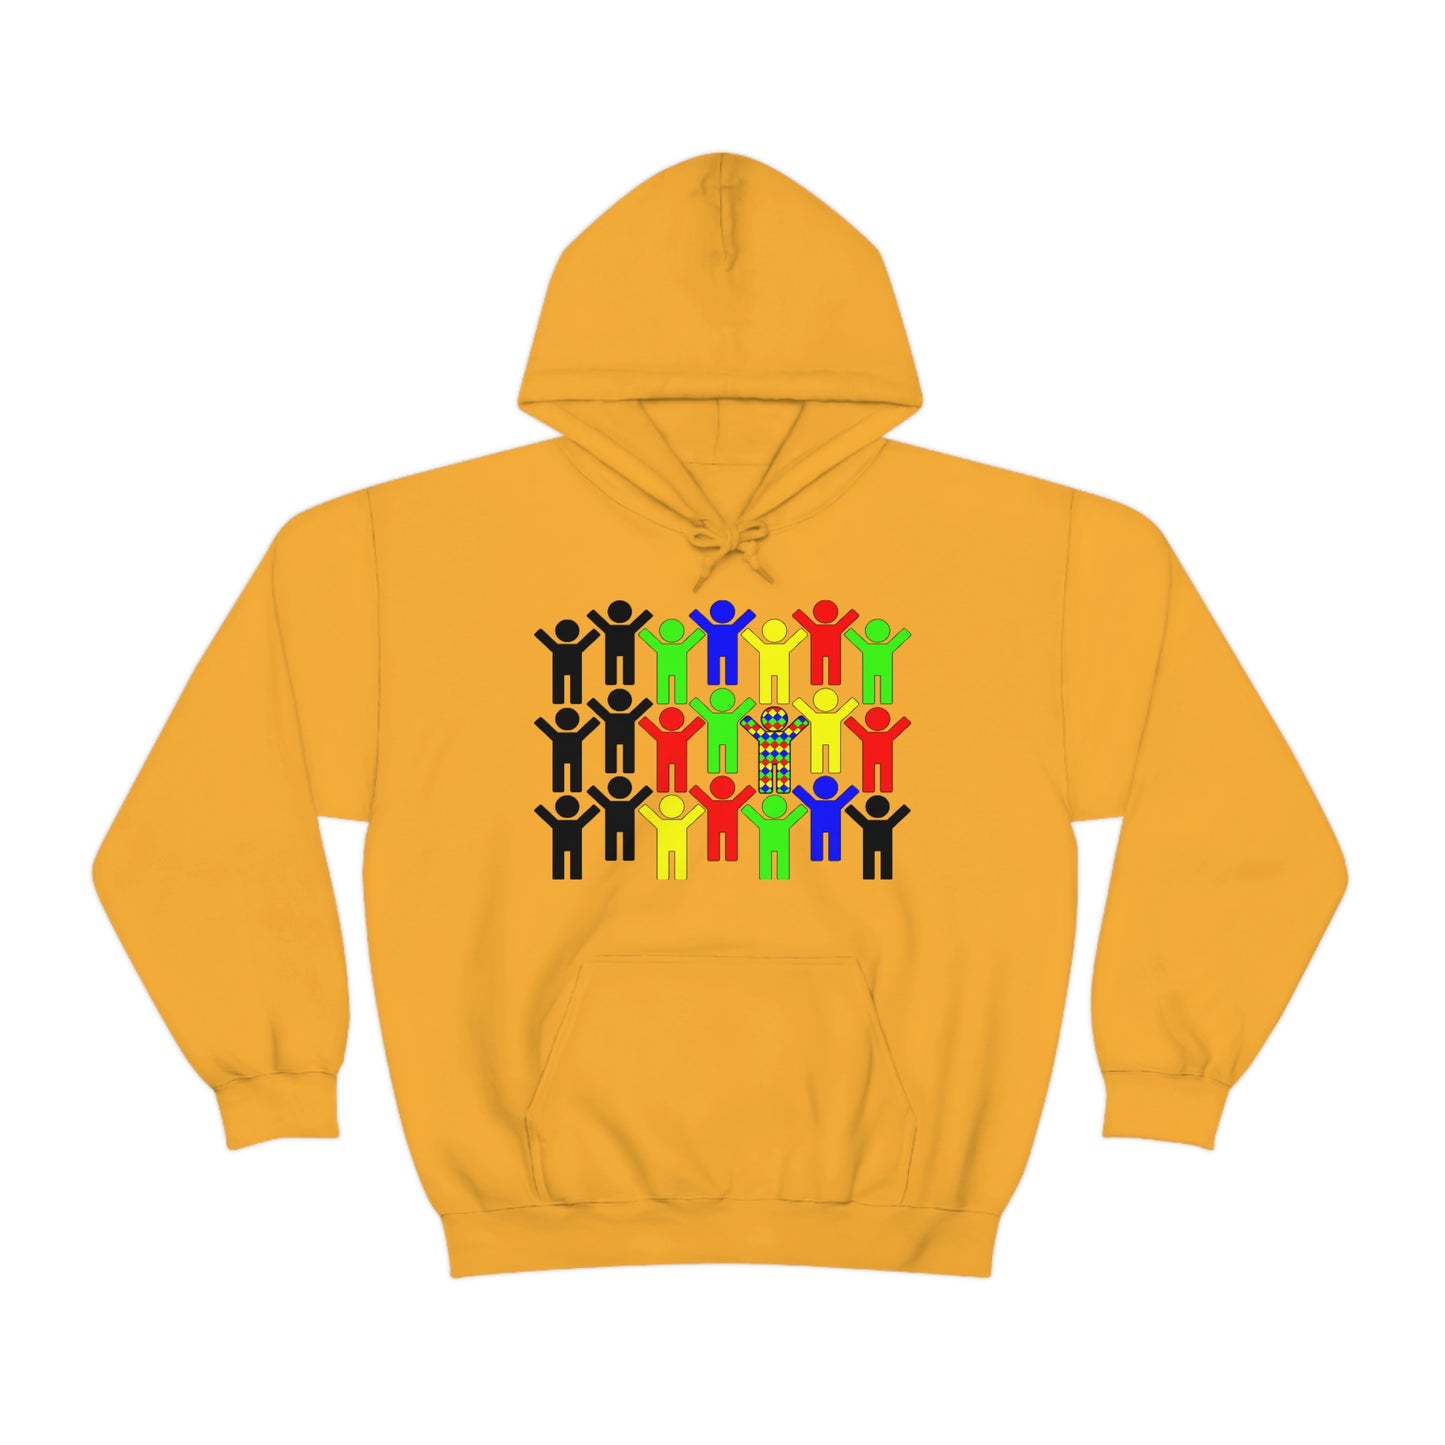 Unisex Heavy Blend™ Hooded Sweatshirt "Change the world by changing yourself"